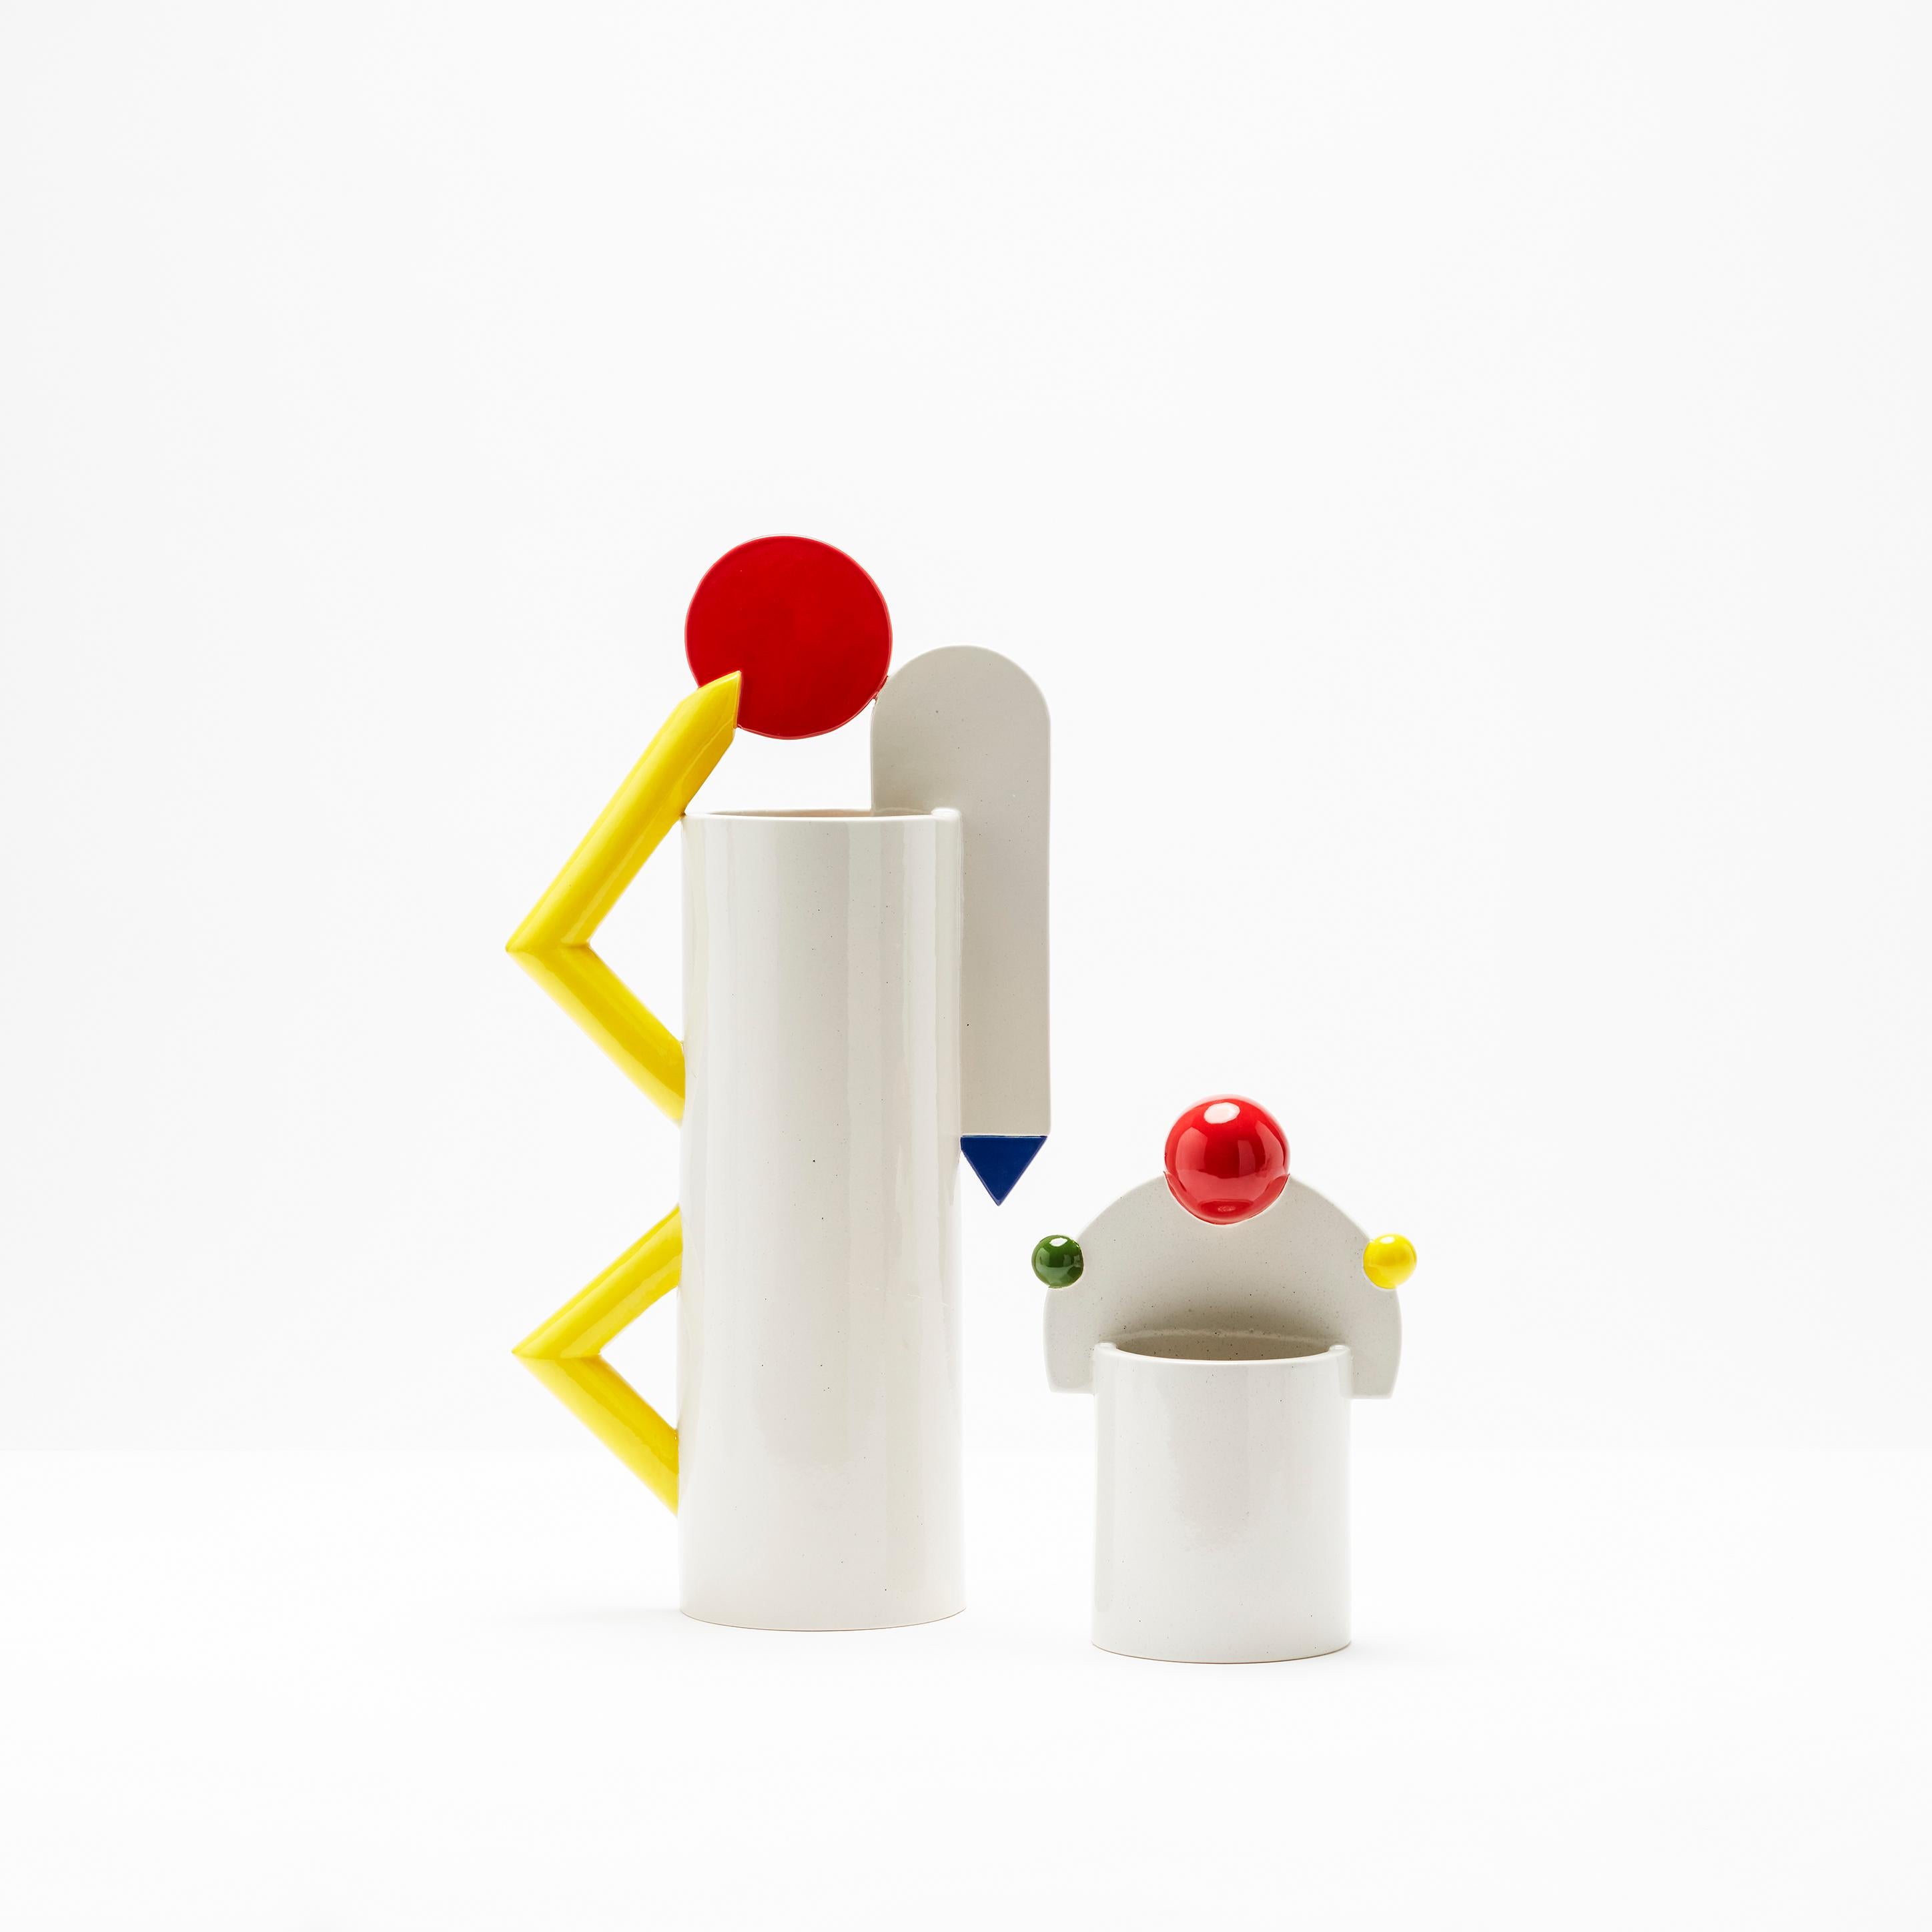 Space M is a collection of glazed ceramic vases made up of five elements. The collection is inspired by Mirò's painting 